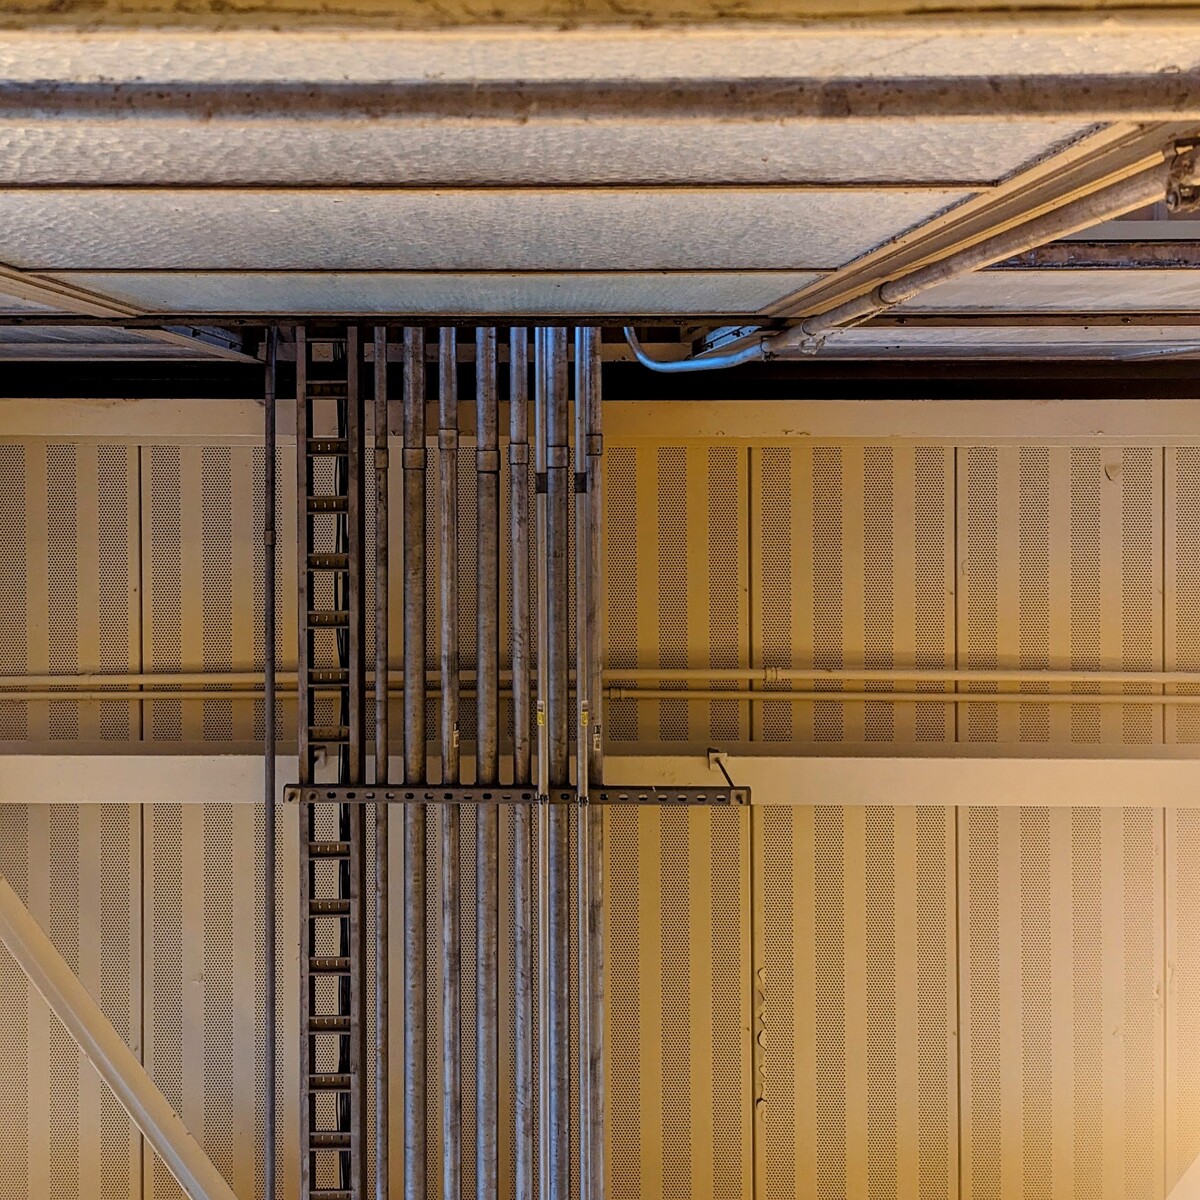 Look up at the ceiling, several pipes enter into the room